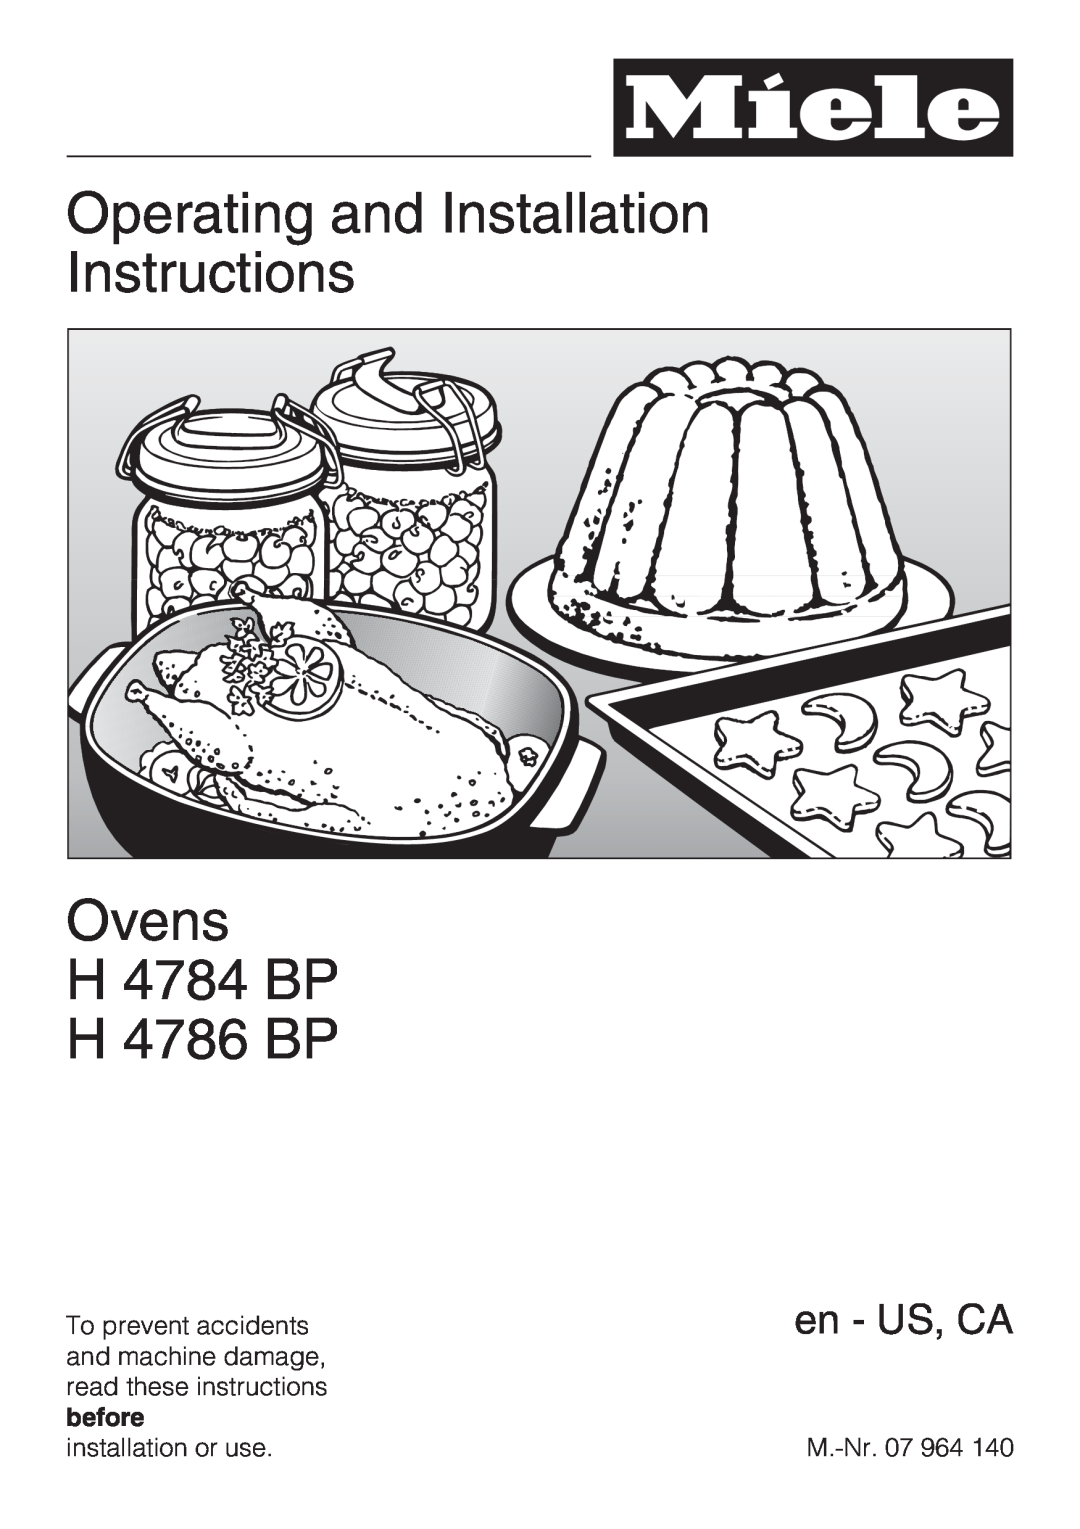 Miele installation instructions Operating and Installation Instructions Ovens, H 4784 BP H 4786 BP, en - US, CA 